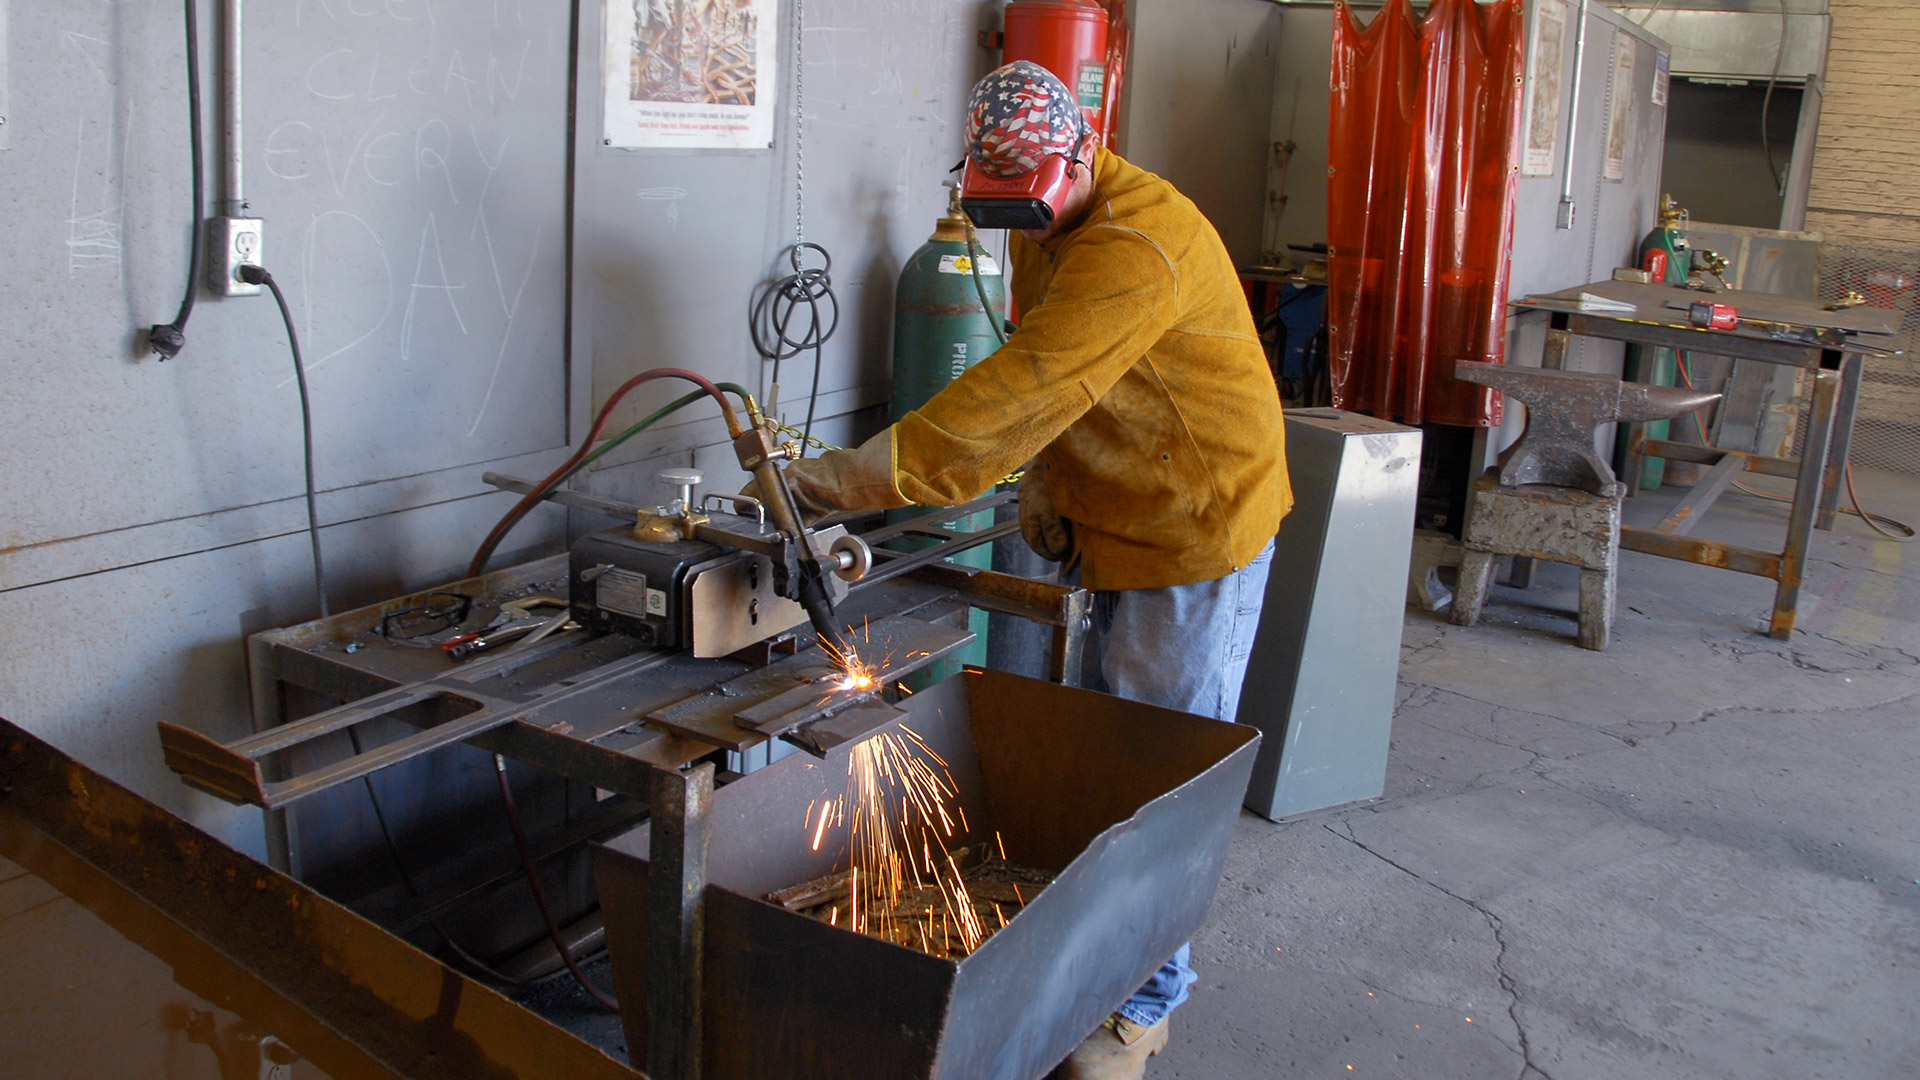 Welding student practices cutting metal in workshop with sparks flowing